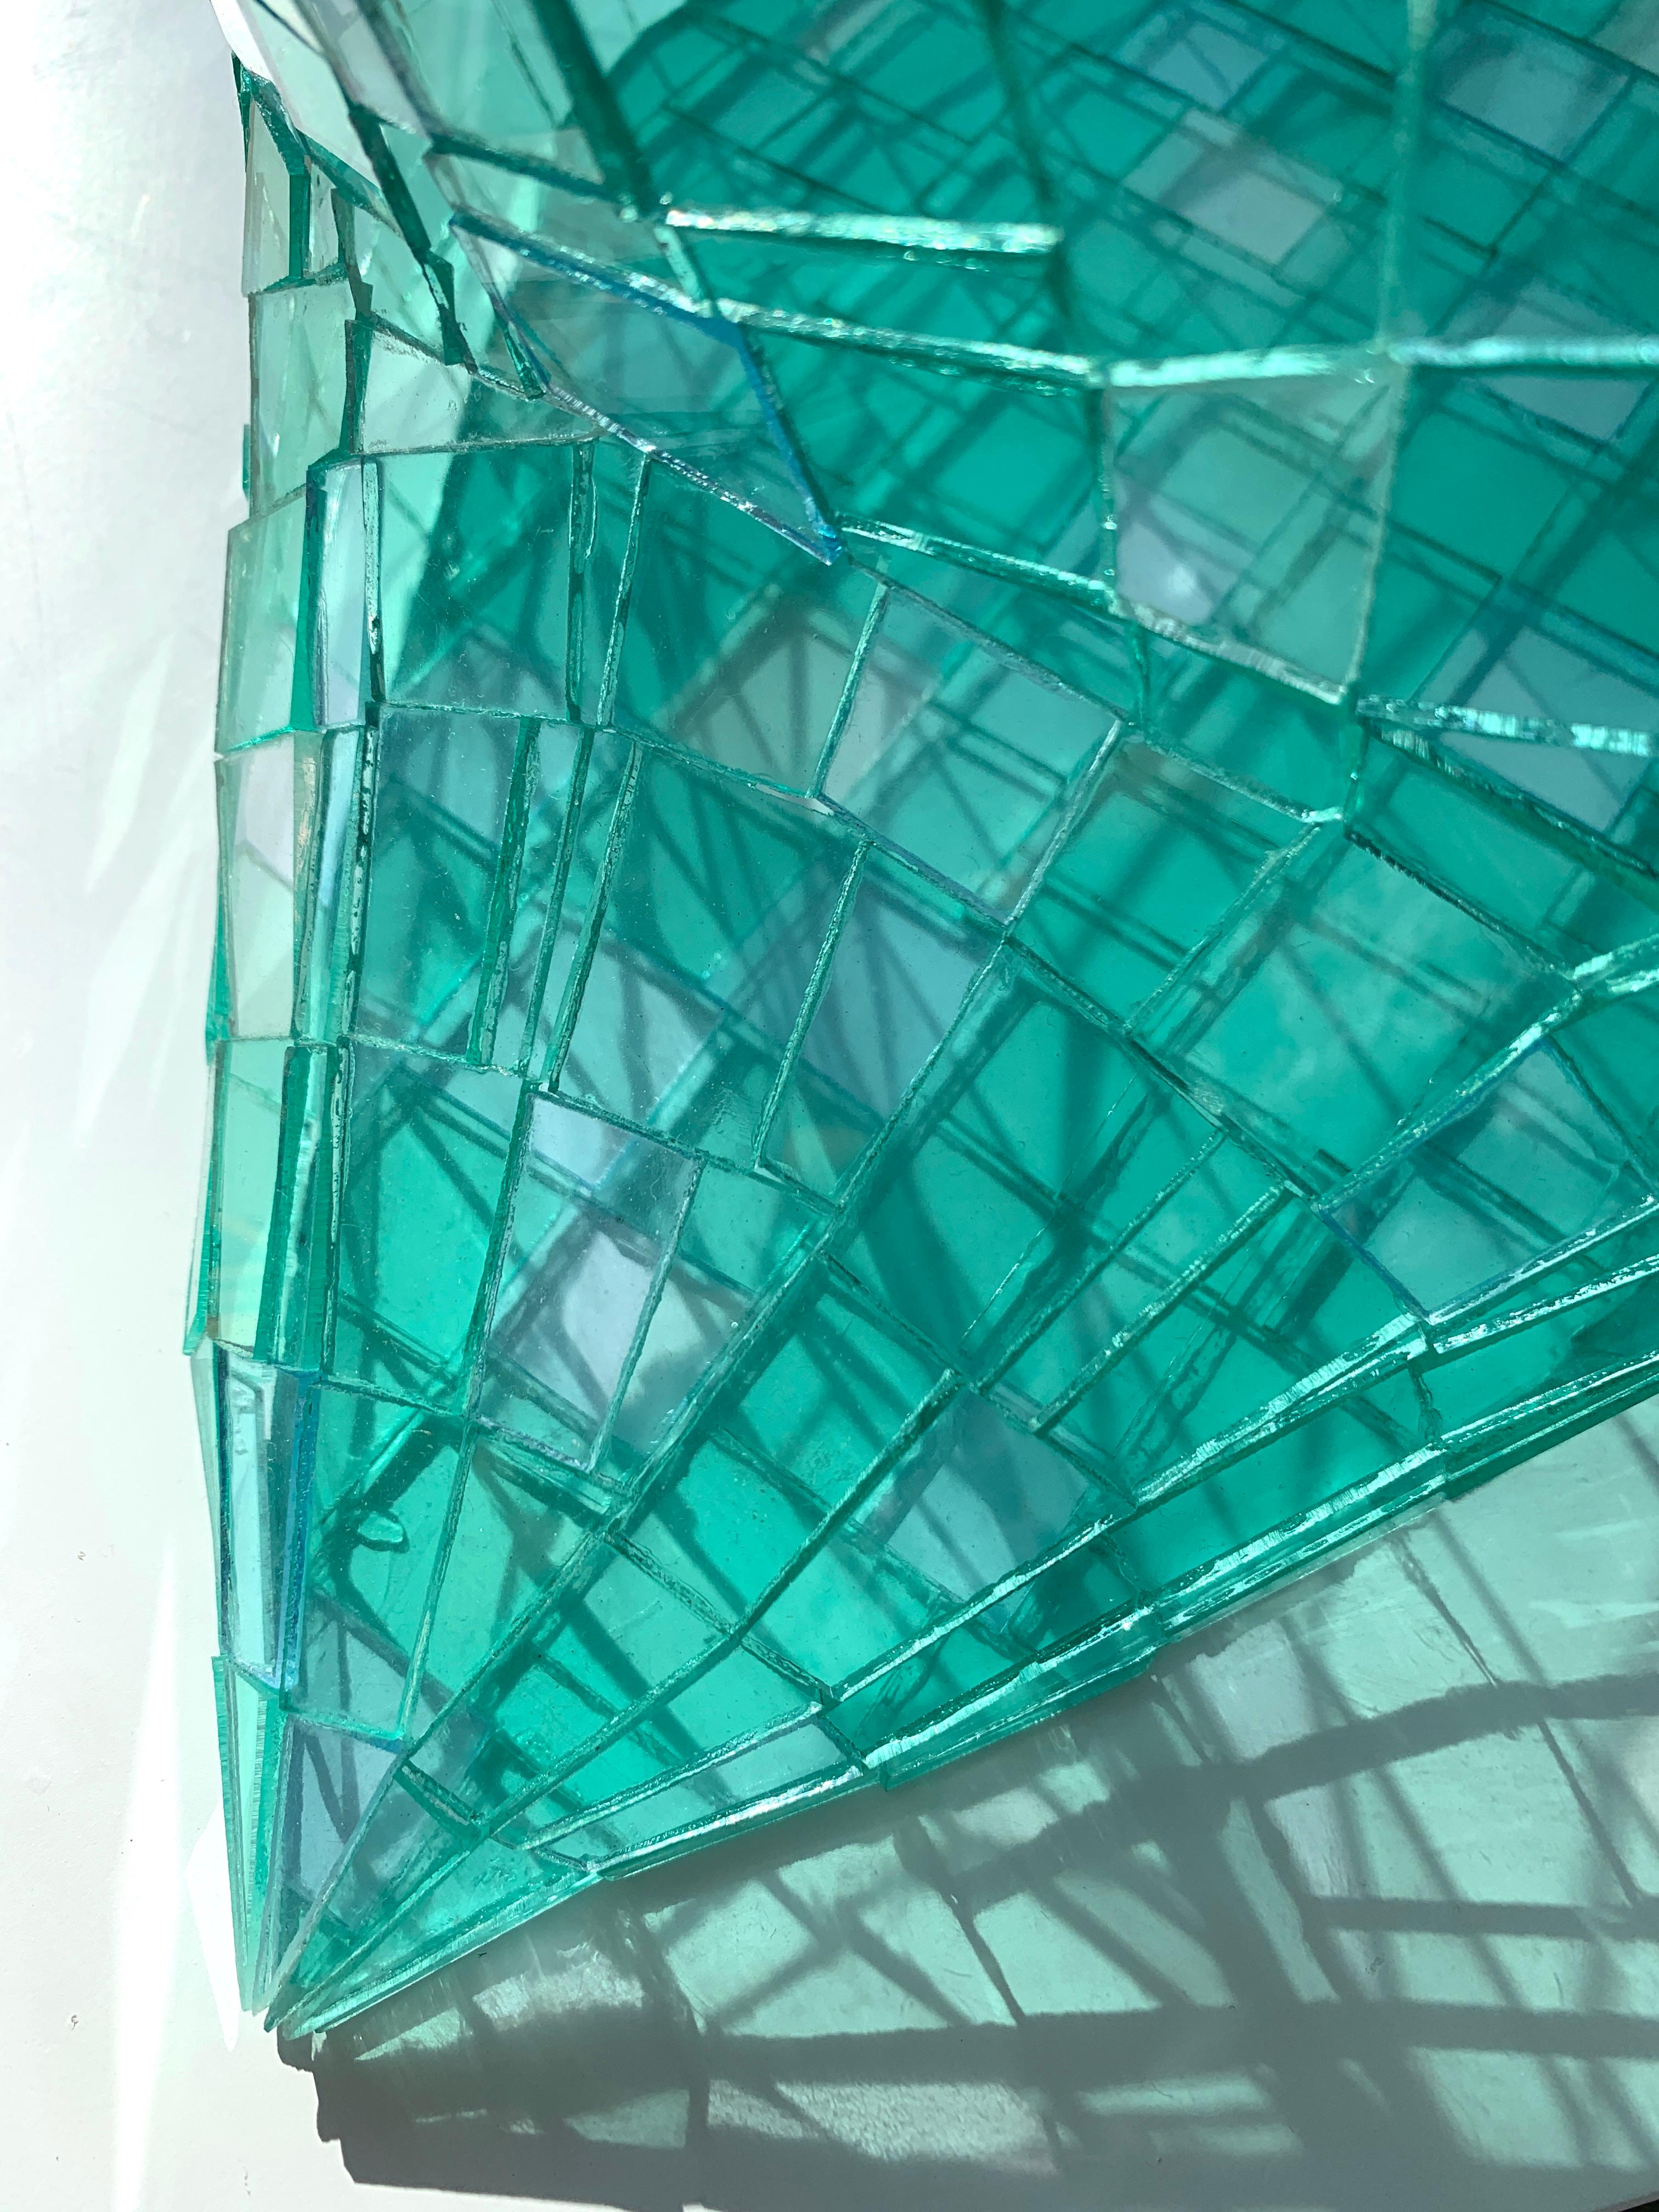 Glass Pillow (Green), Colin Roberts Plexiglass Sculpture Transparent

NOTE:  Roberts' Glass Pillow Sculptures can be commissioned in almost any transparent color or color combination.

Masterpieces of Plexiglass and light and lighthearted sculpture